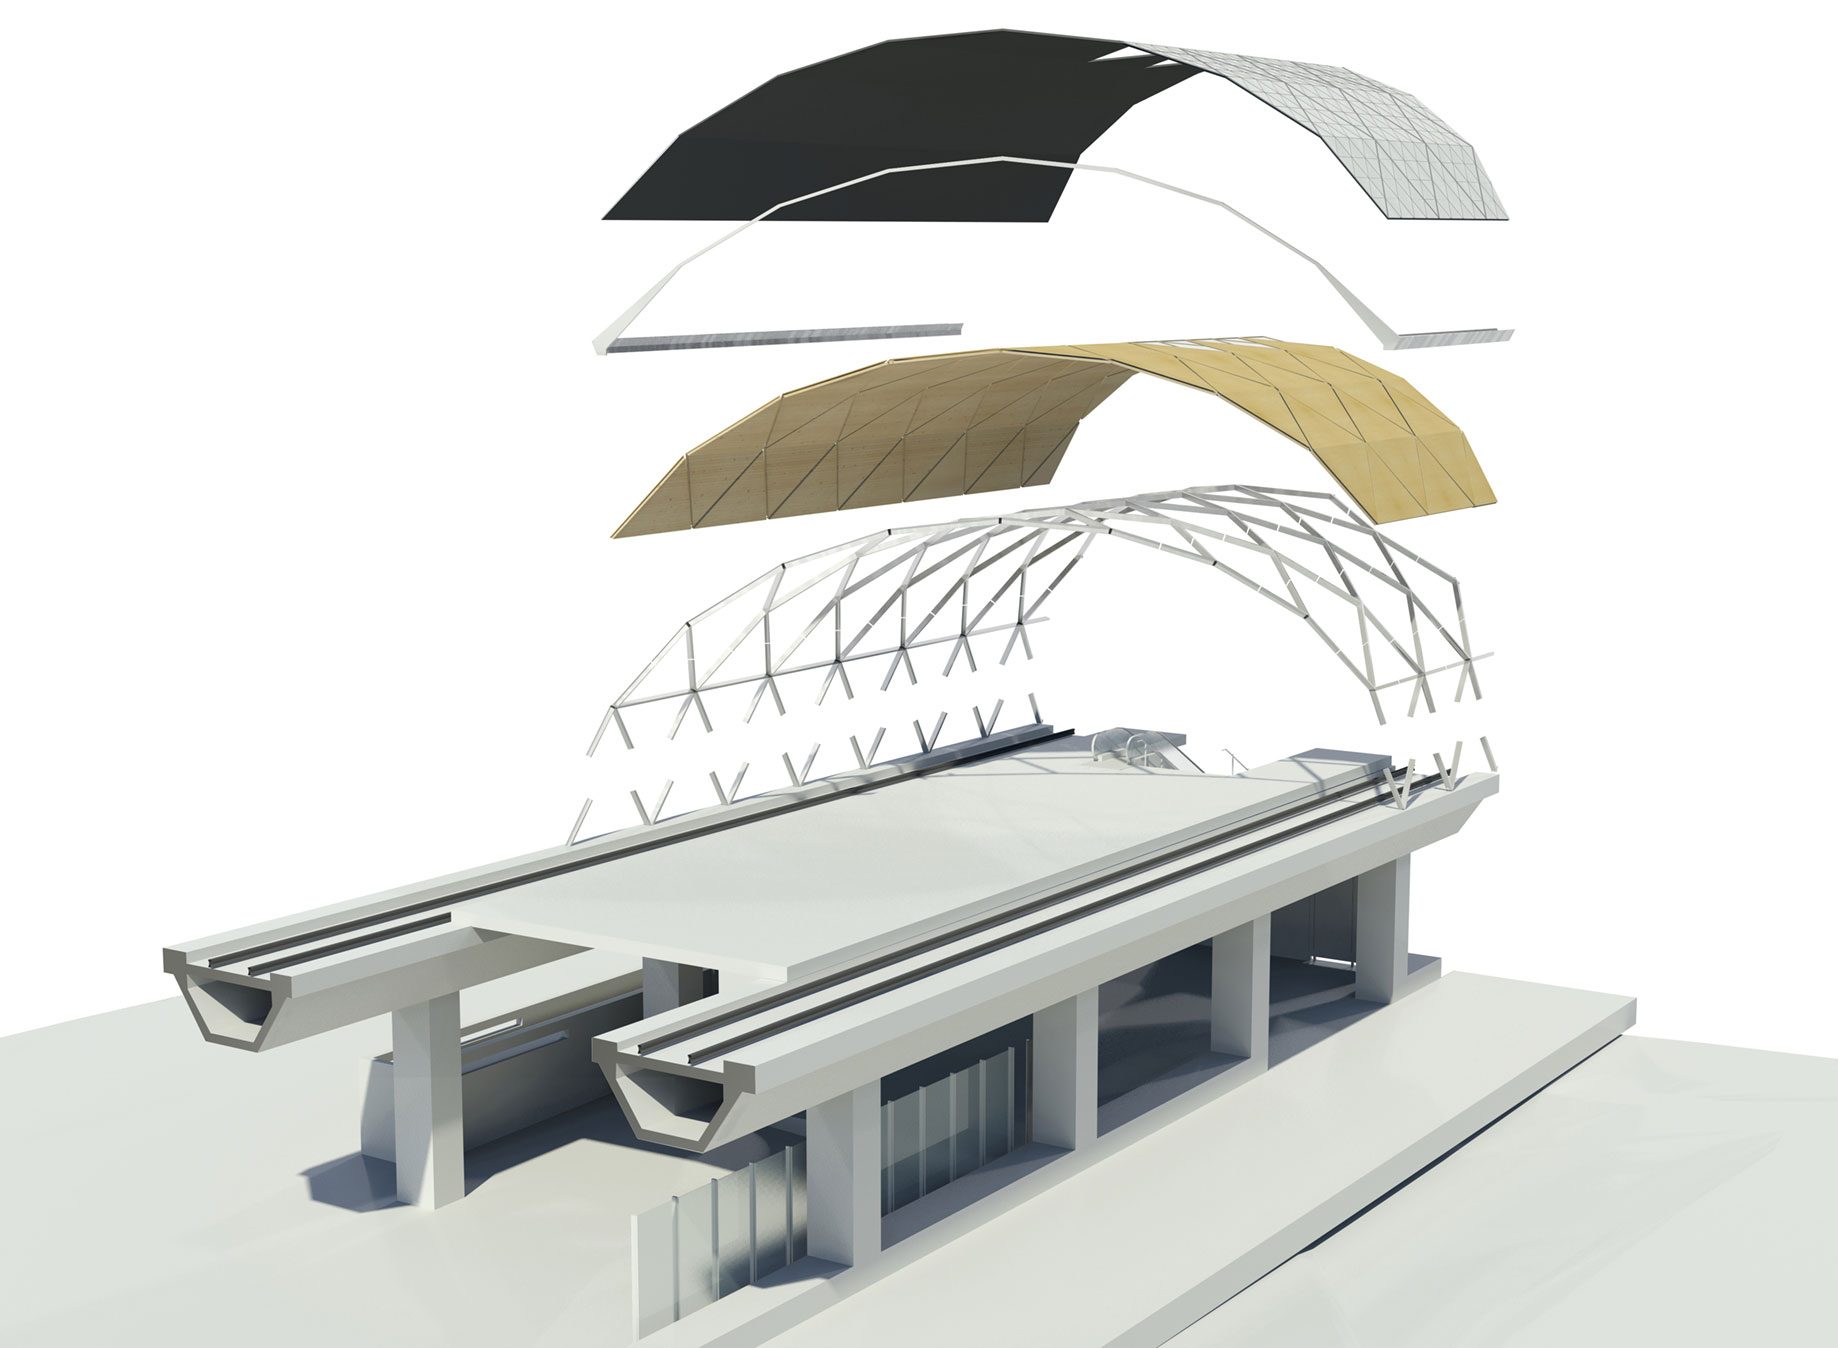 Axonometric rendering showing roof components of stations.